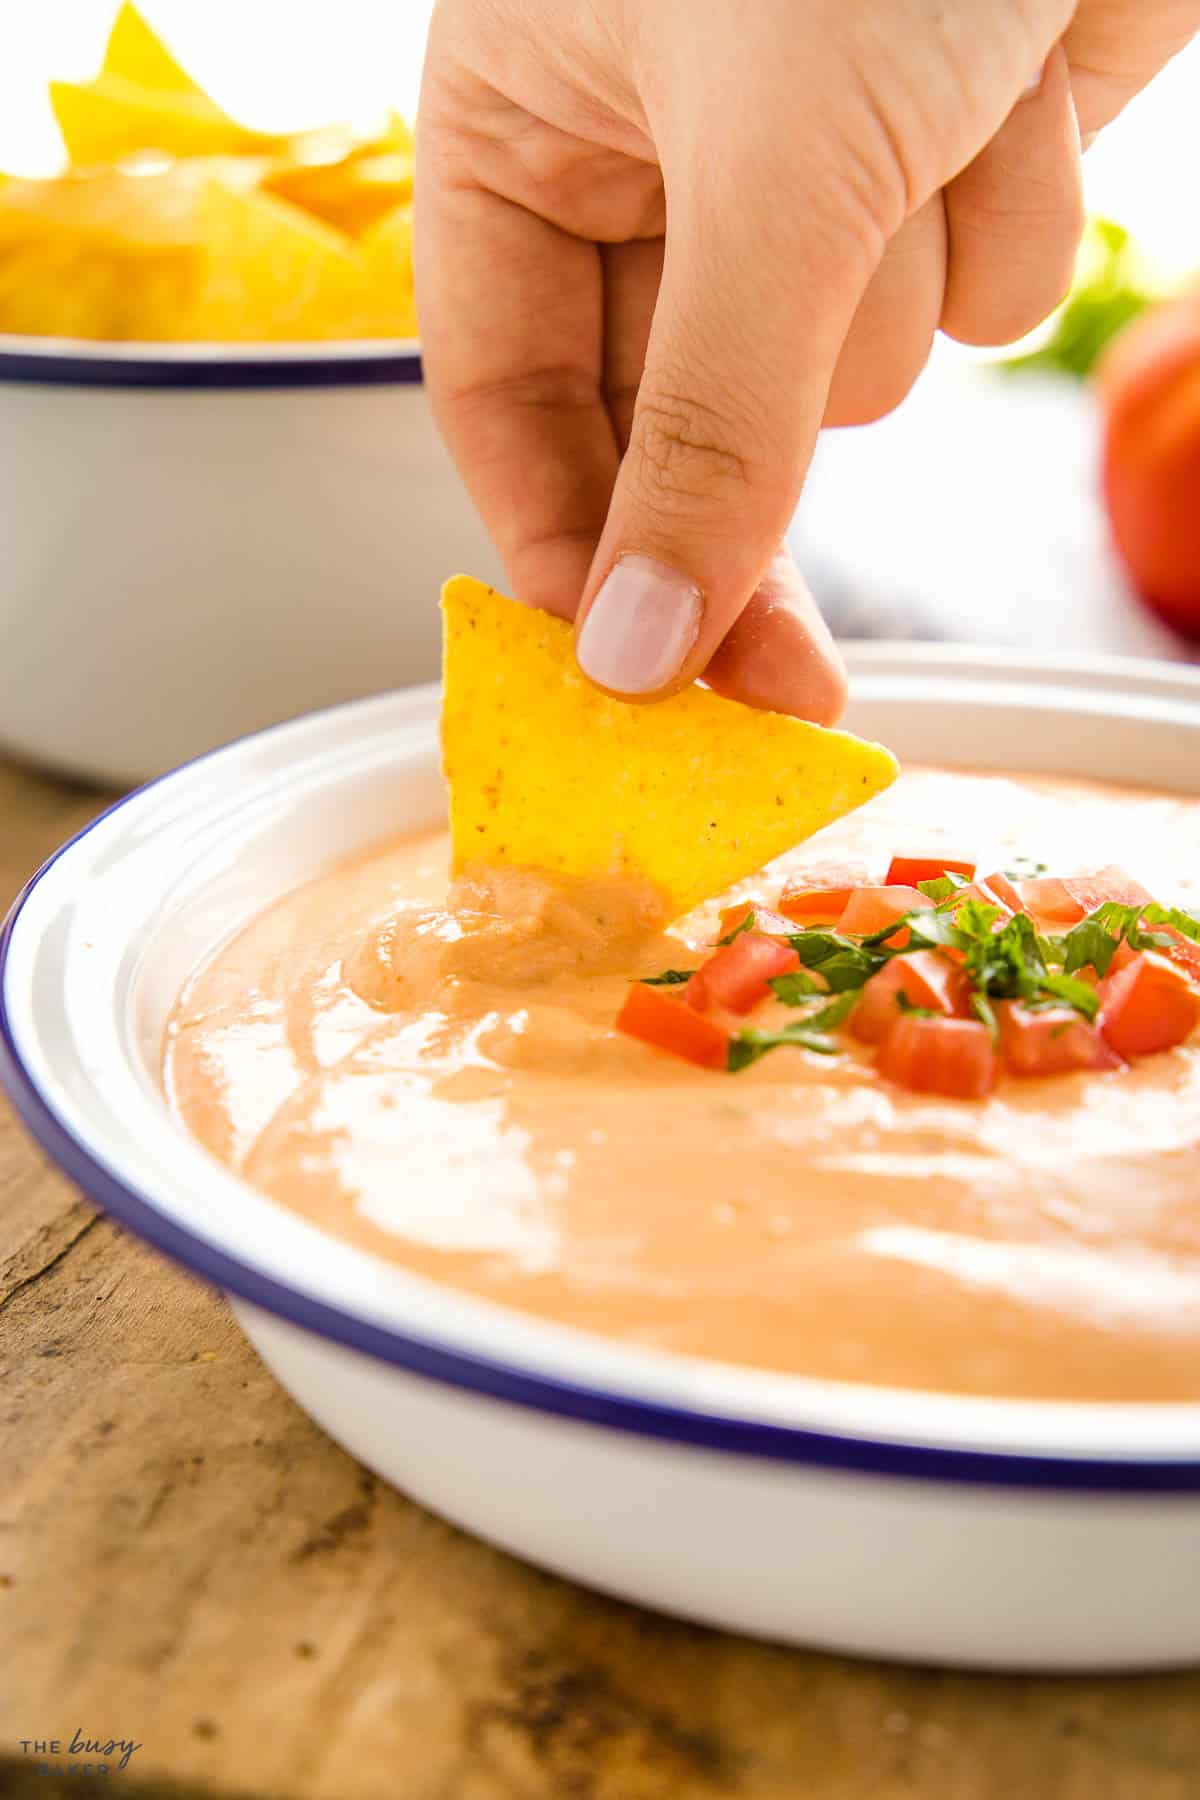 hand dipping tortilla chip in melted cheese appetizer